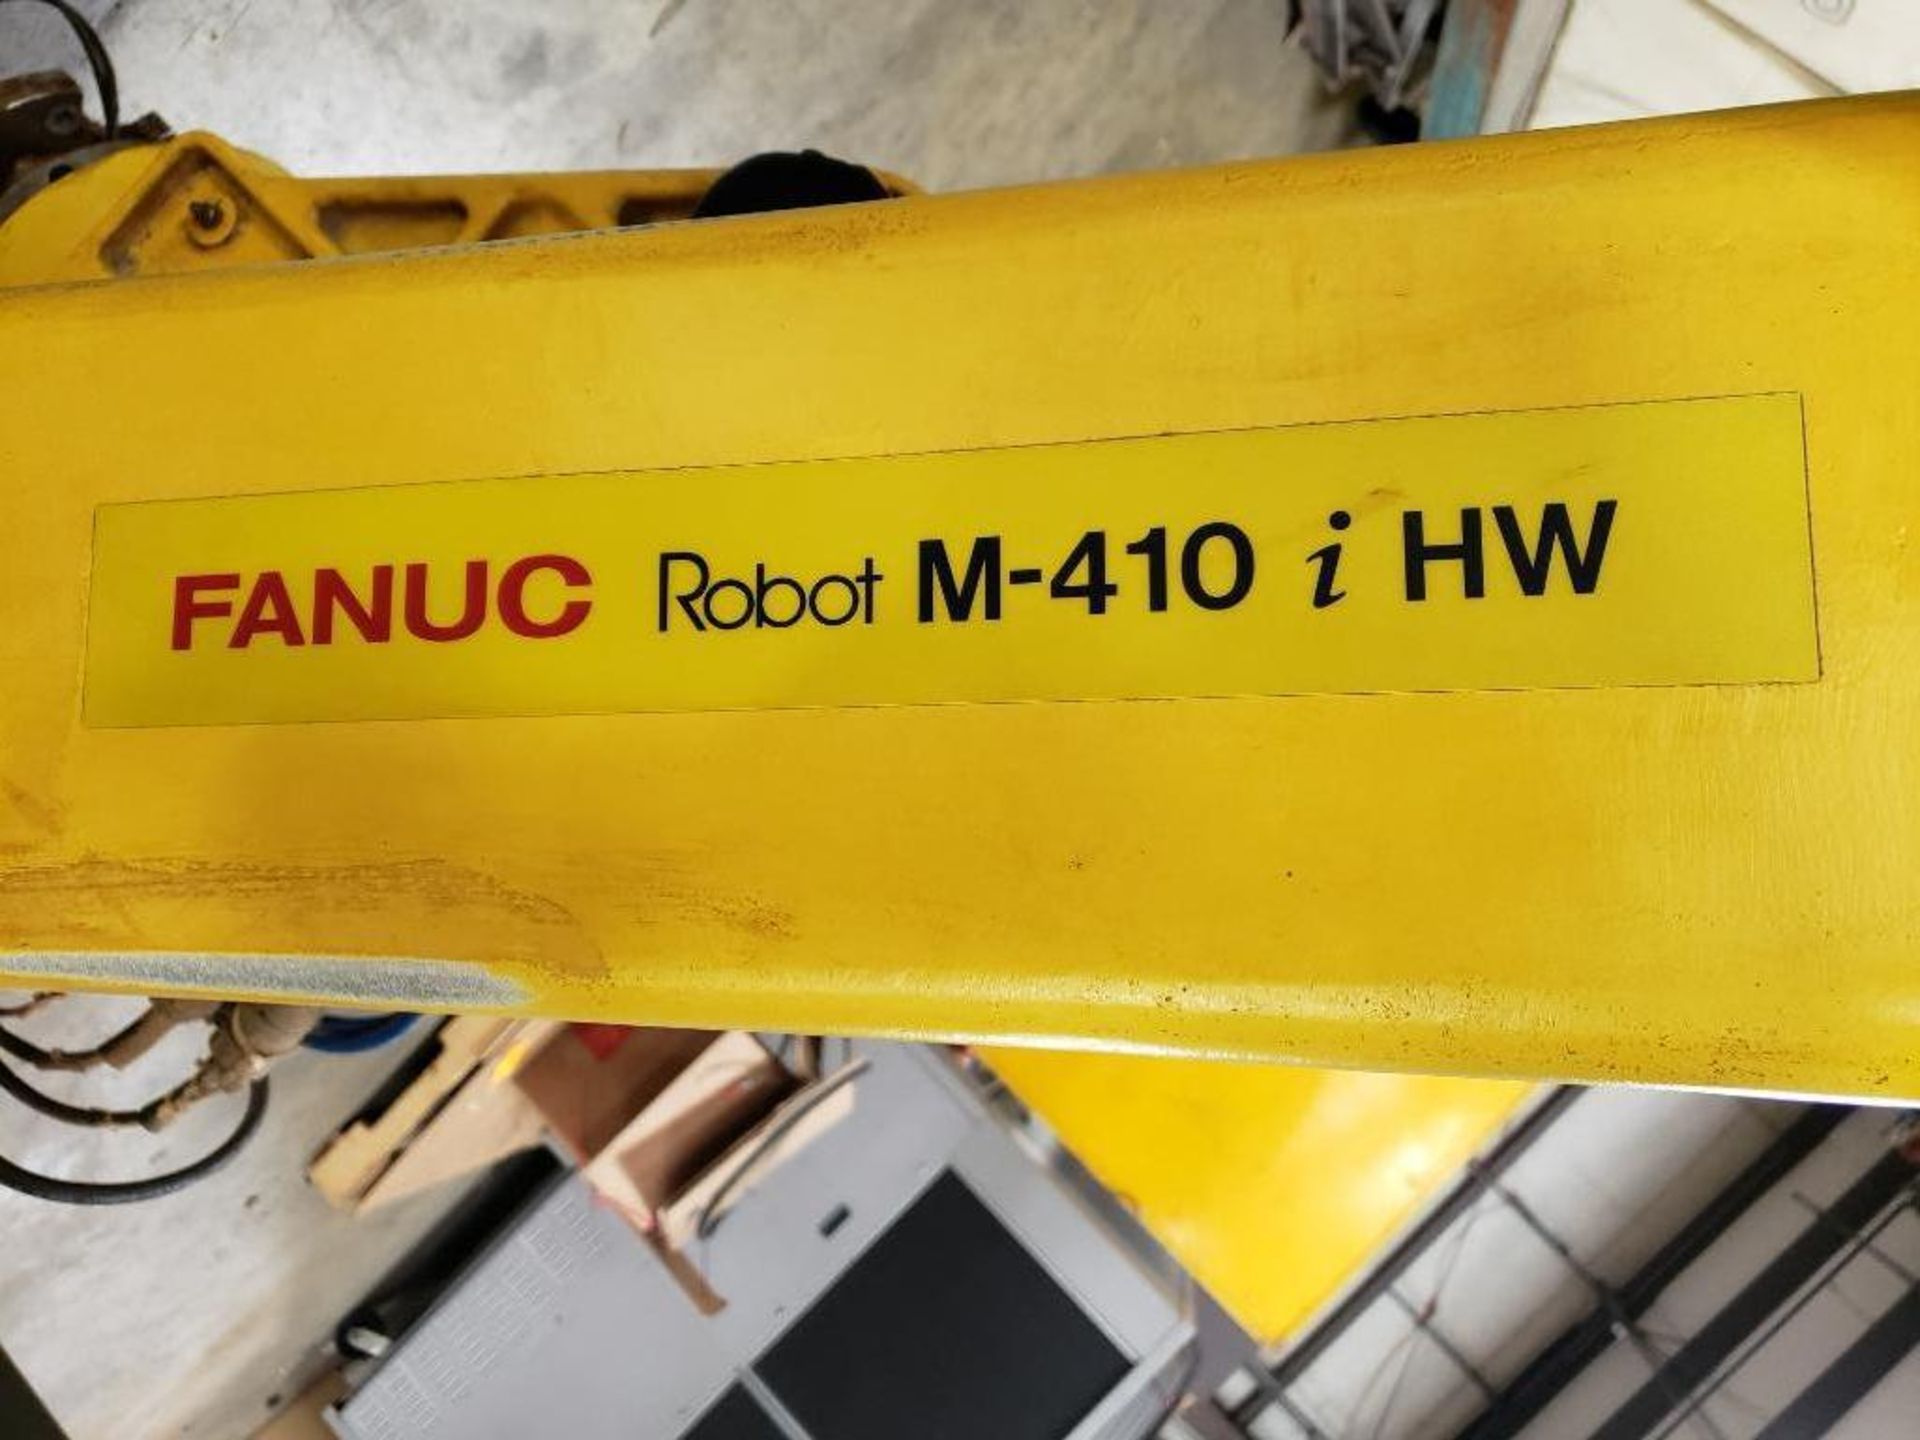 Fanuc M-410i HW robot arm. Does not include controller or cables. (cables have been cut) - Image 2 of 27